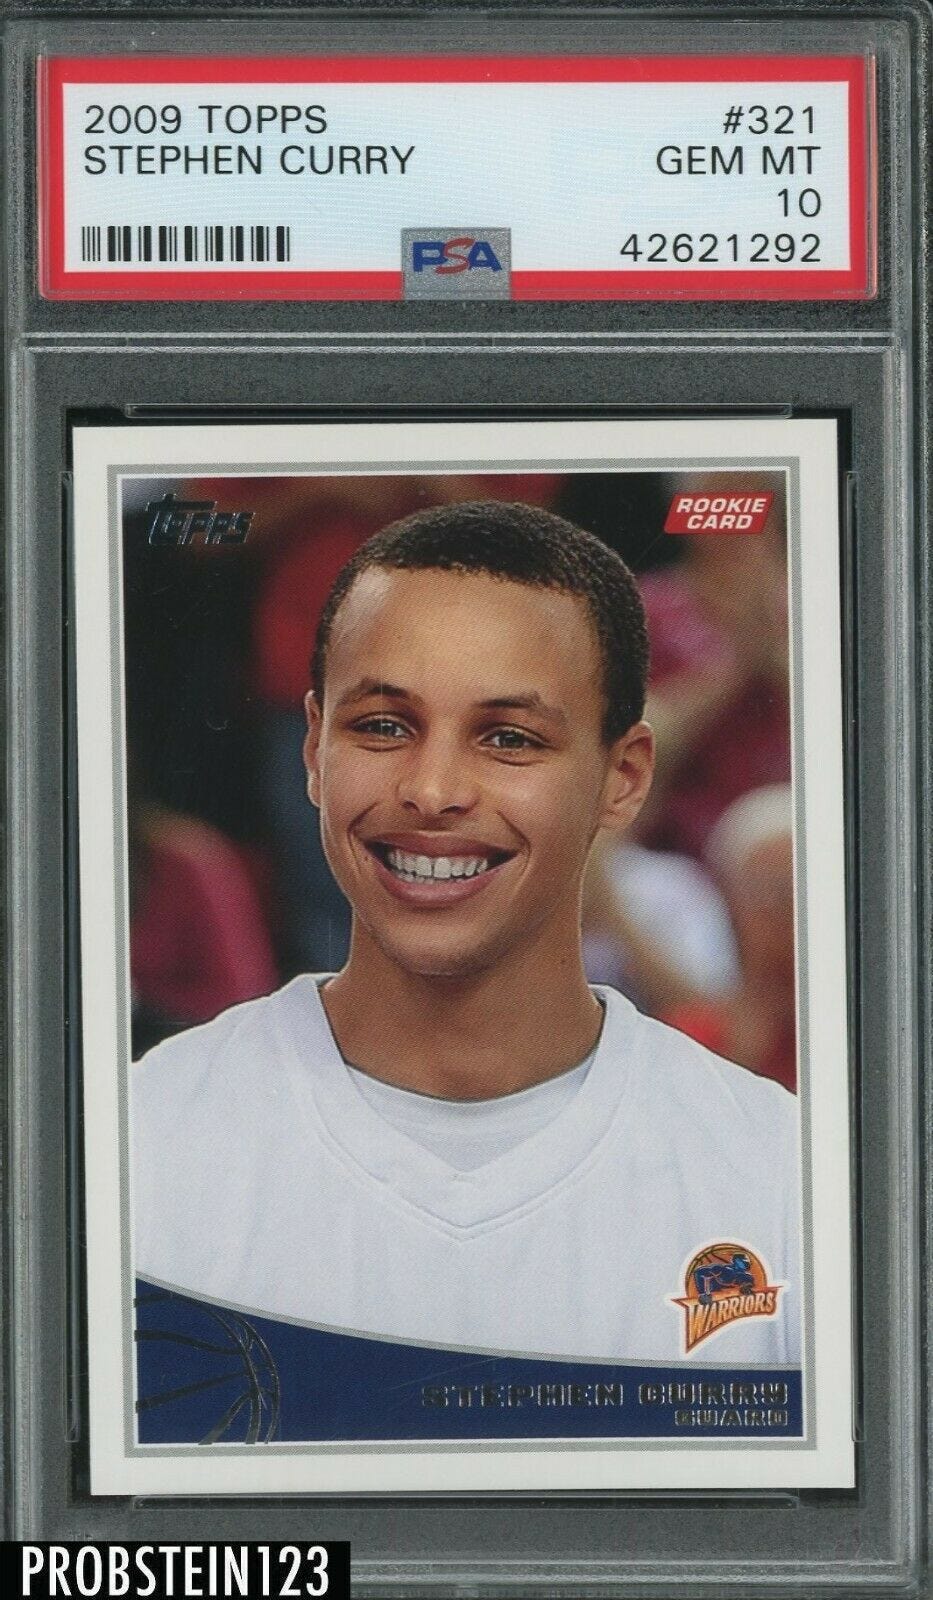 Image 1 - 2009-10-Topps-321-Stephen-Curry-Warriors-RC-Rookie-PSA-10-ABSOLUTELY-FLAWLESS